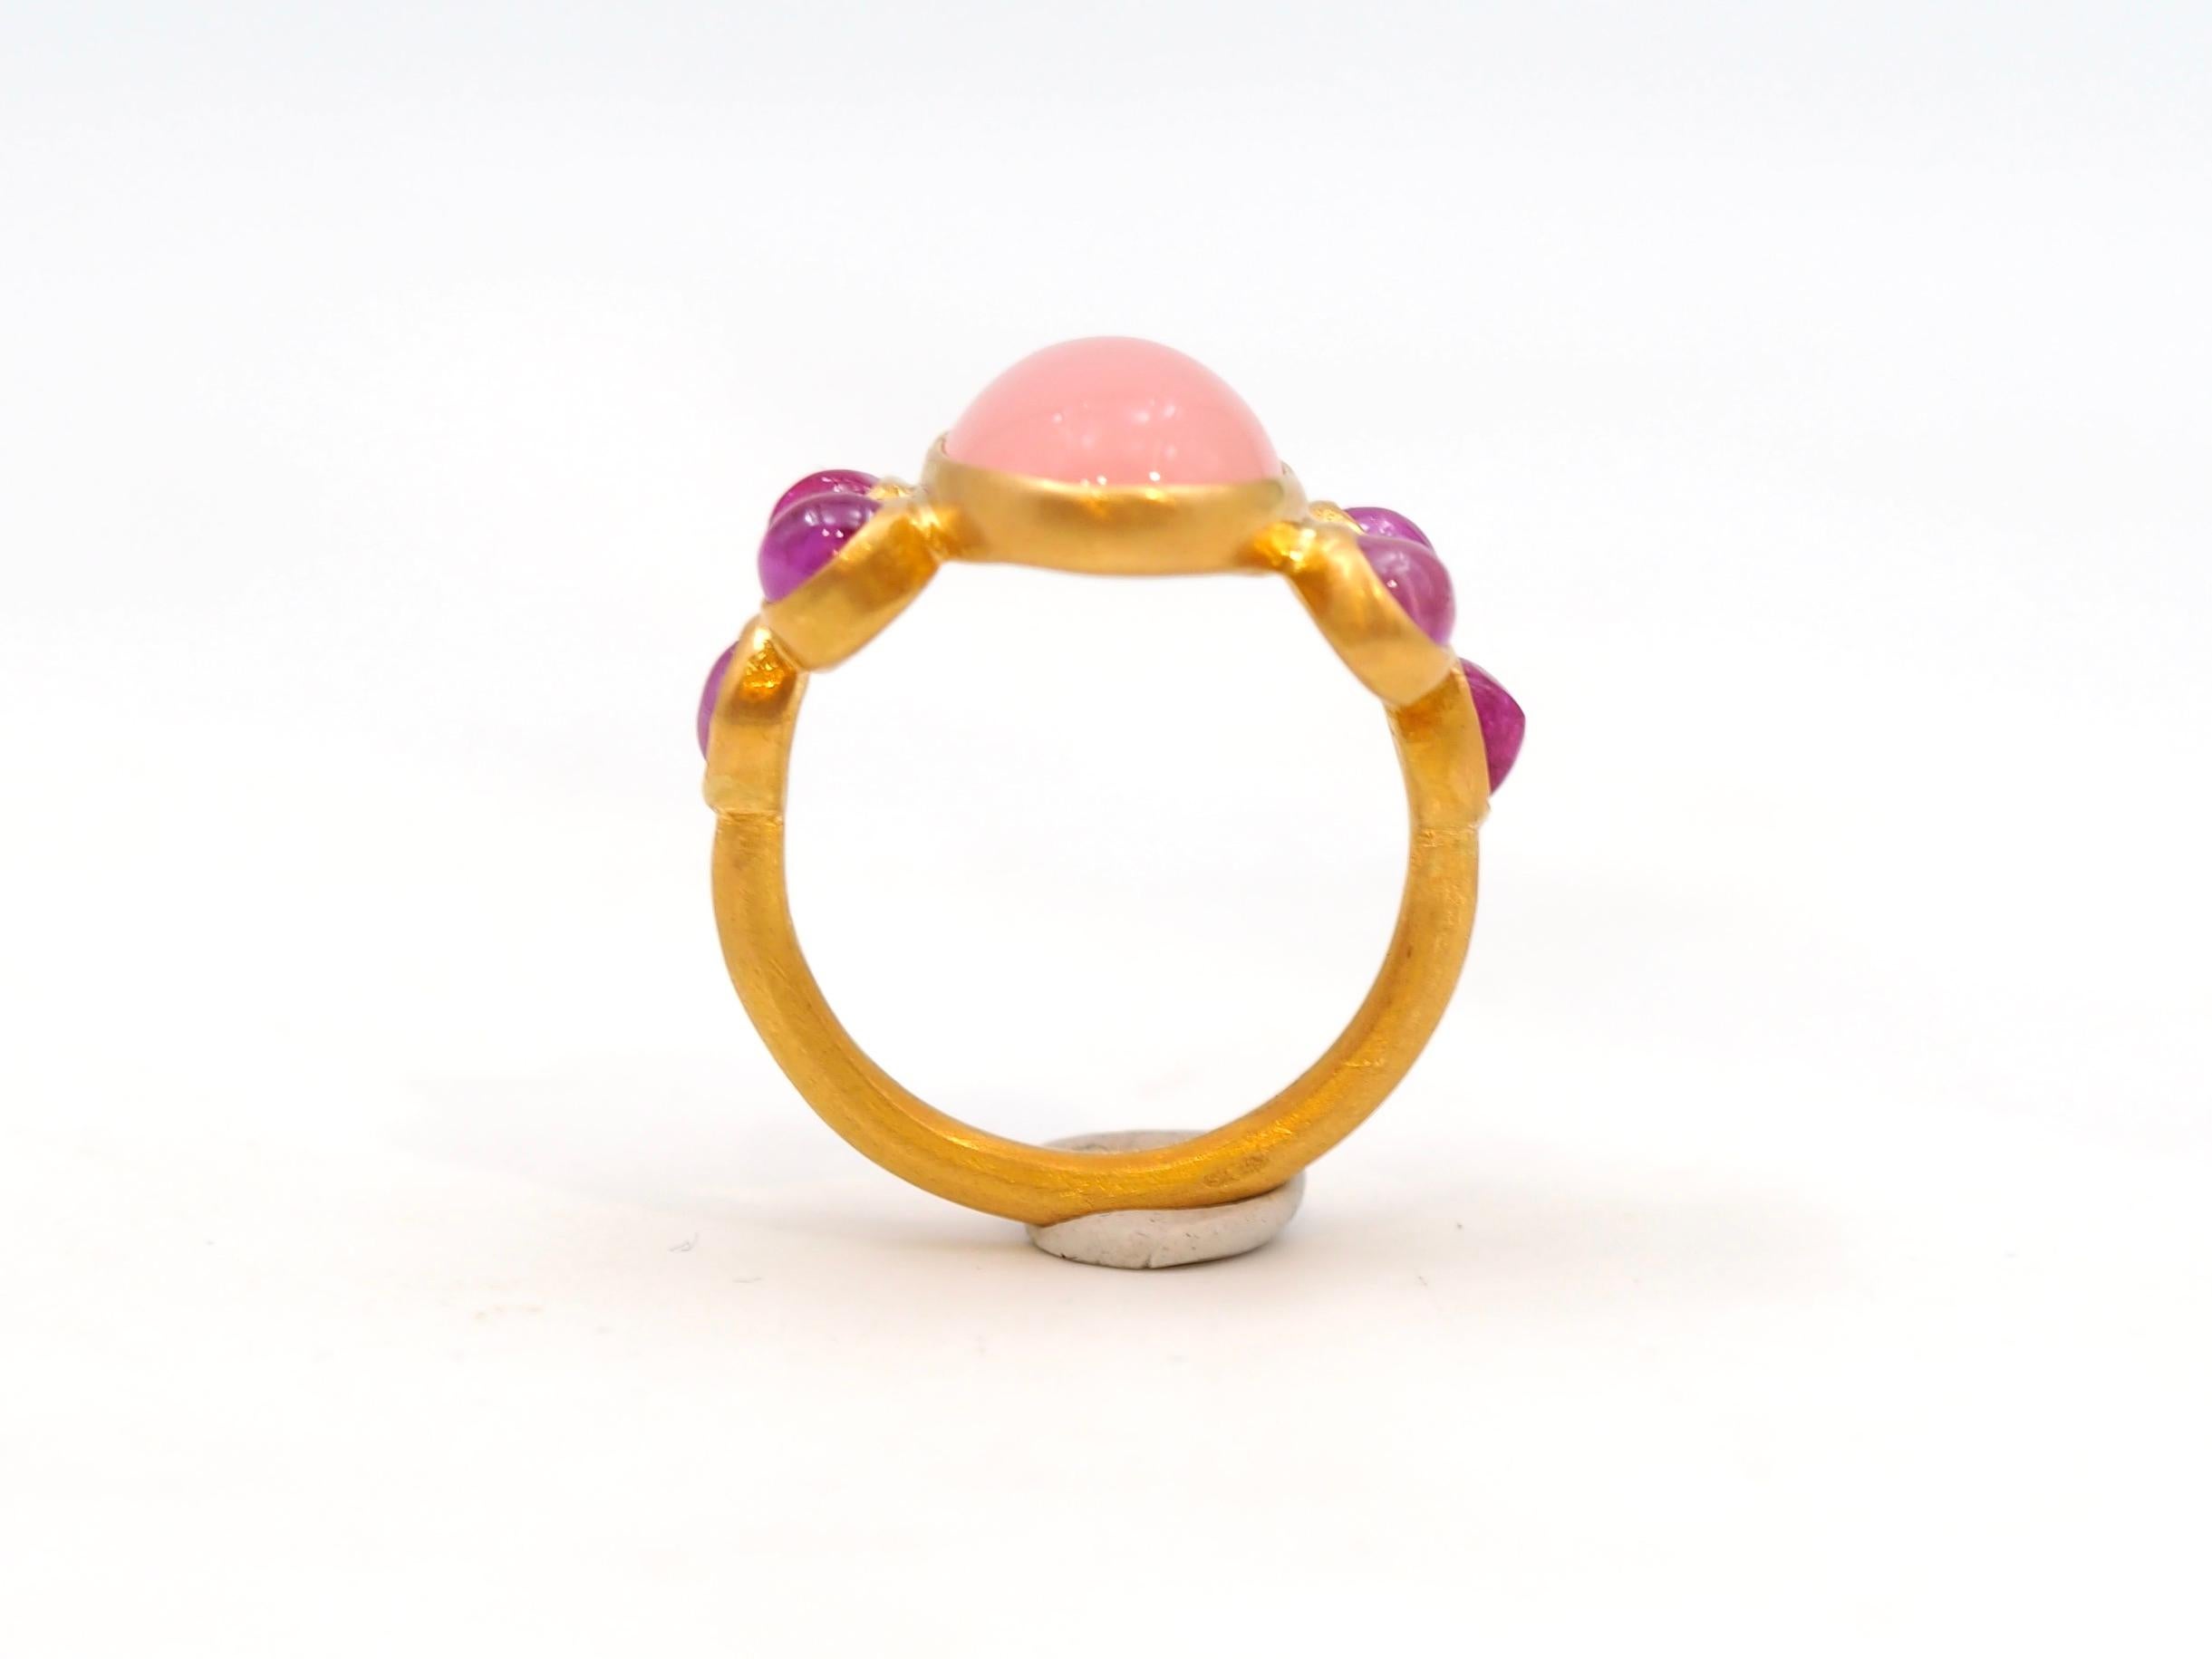 Scrives 5.25 Ct Peach Chalcedony 3.06 Ct Pink sapphire Cabochon 22 Kt Gold Ring For Sale 5